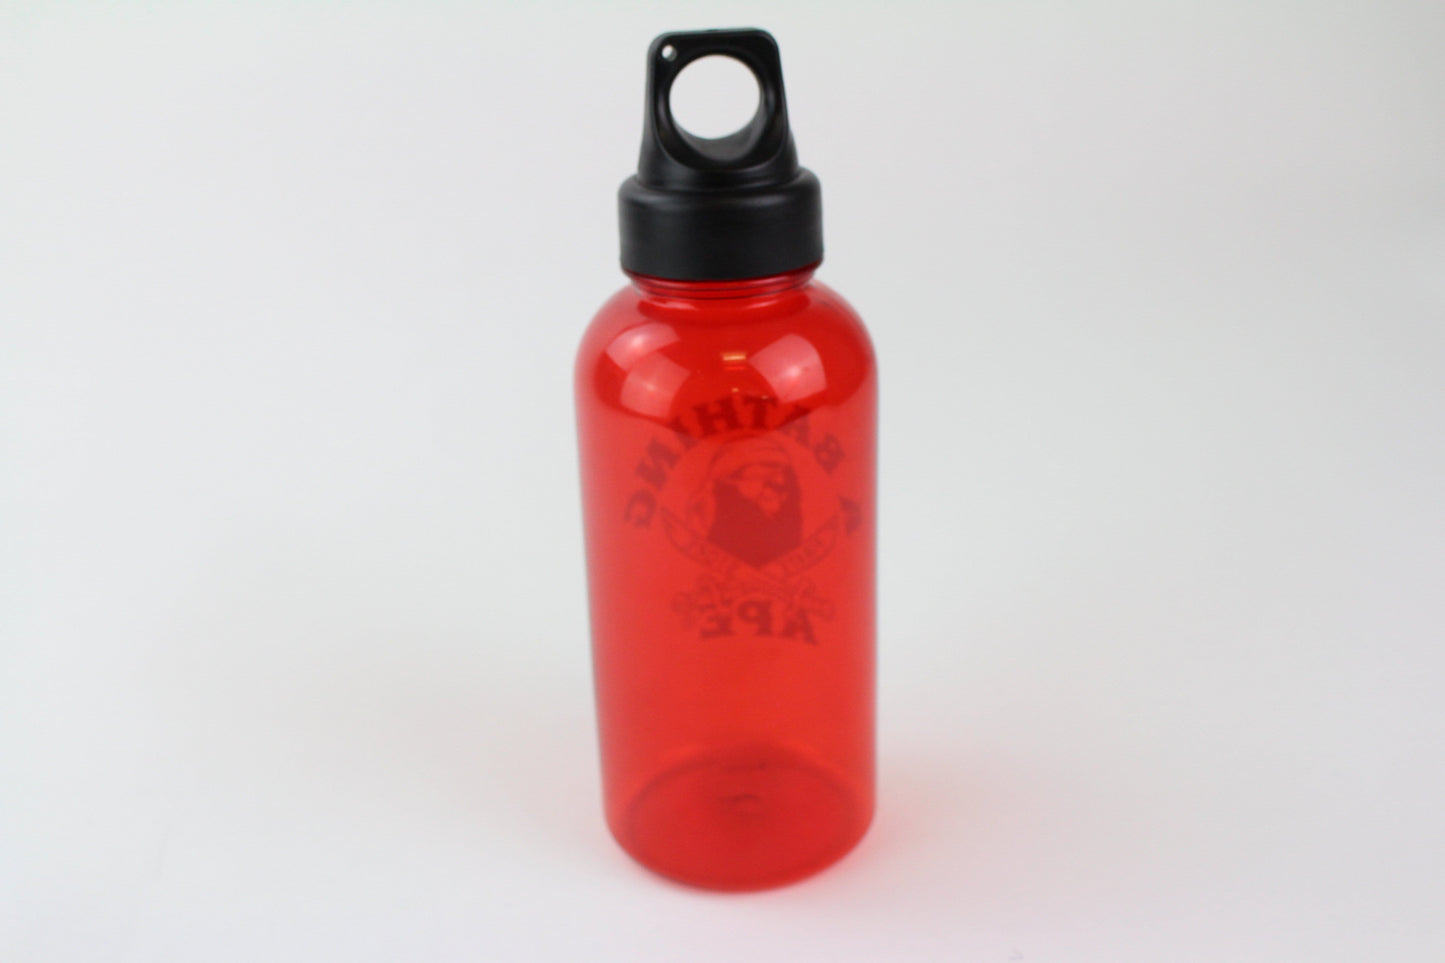 bape pirate store college logo water bottle red - SaruGeneral